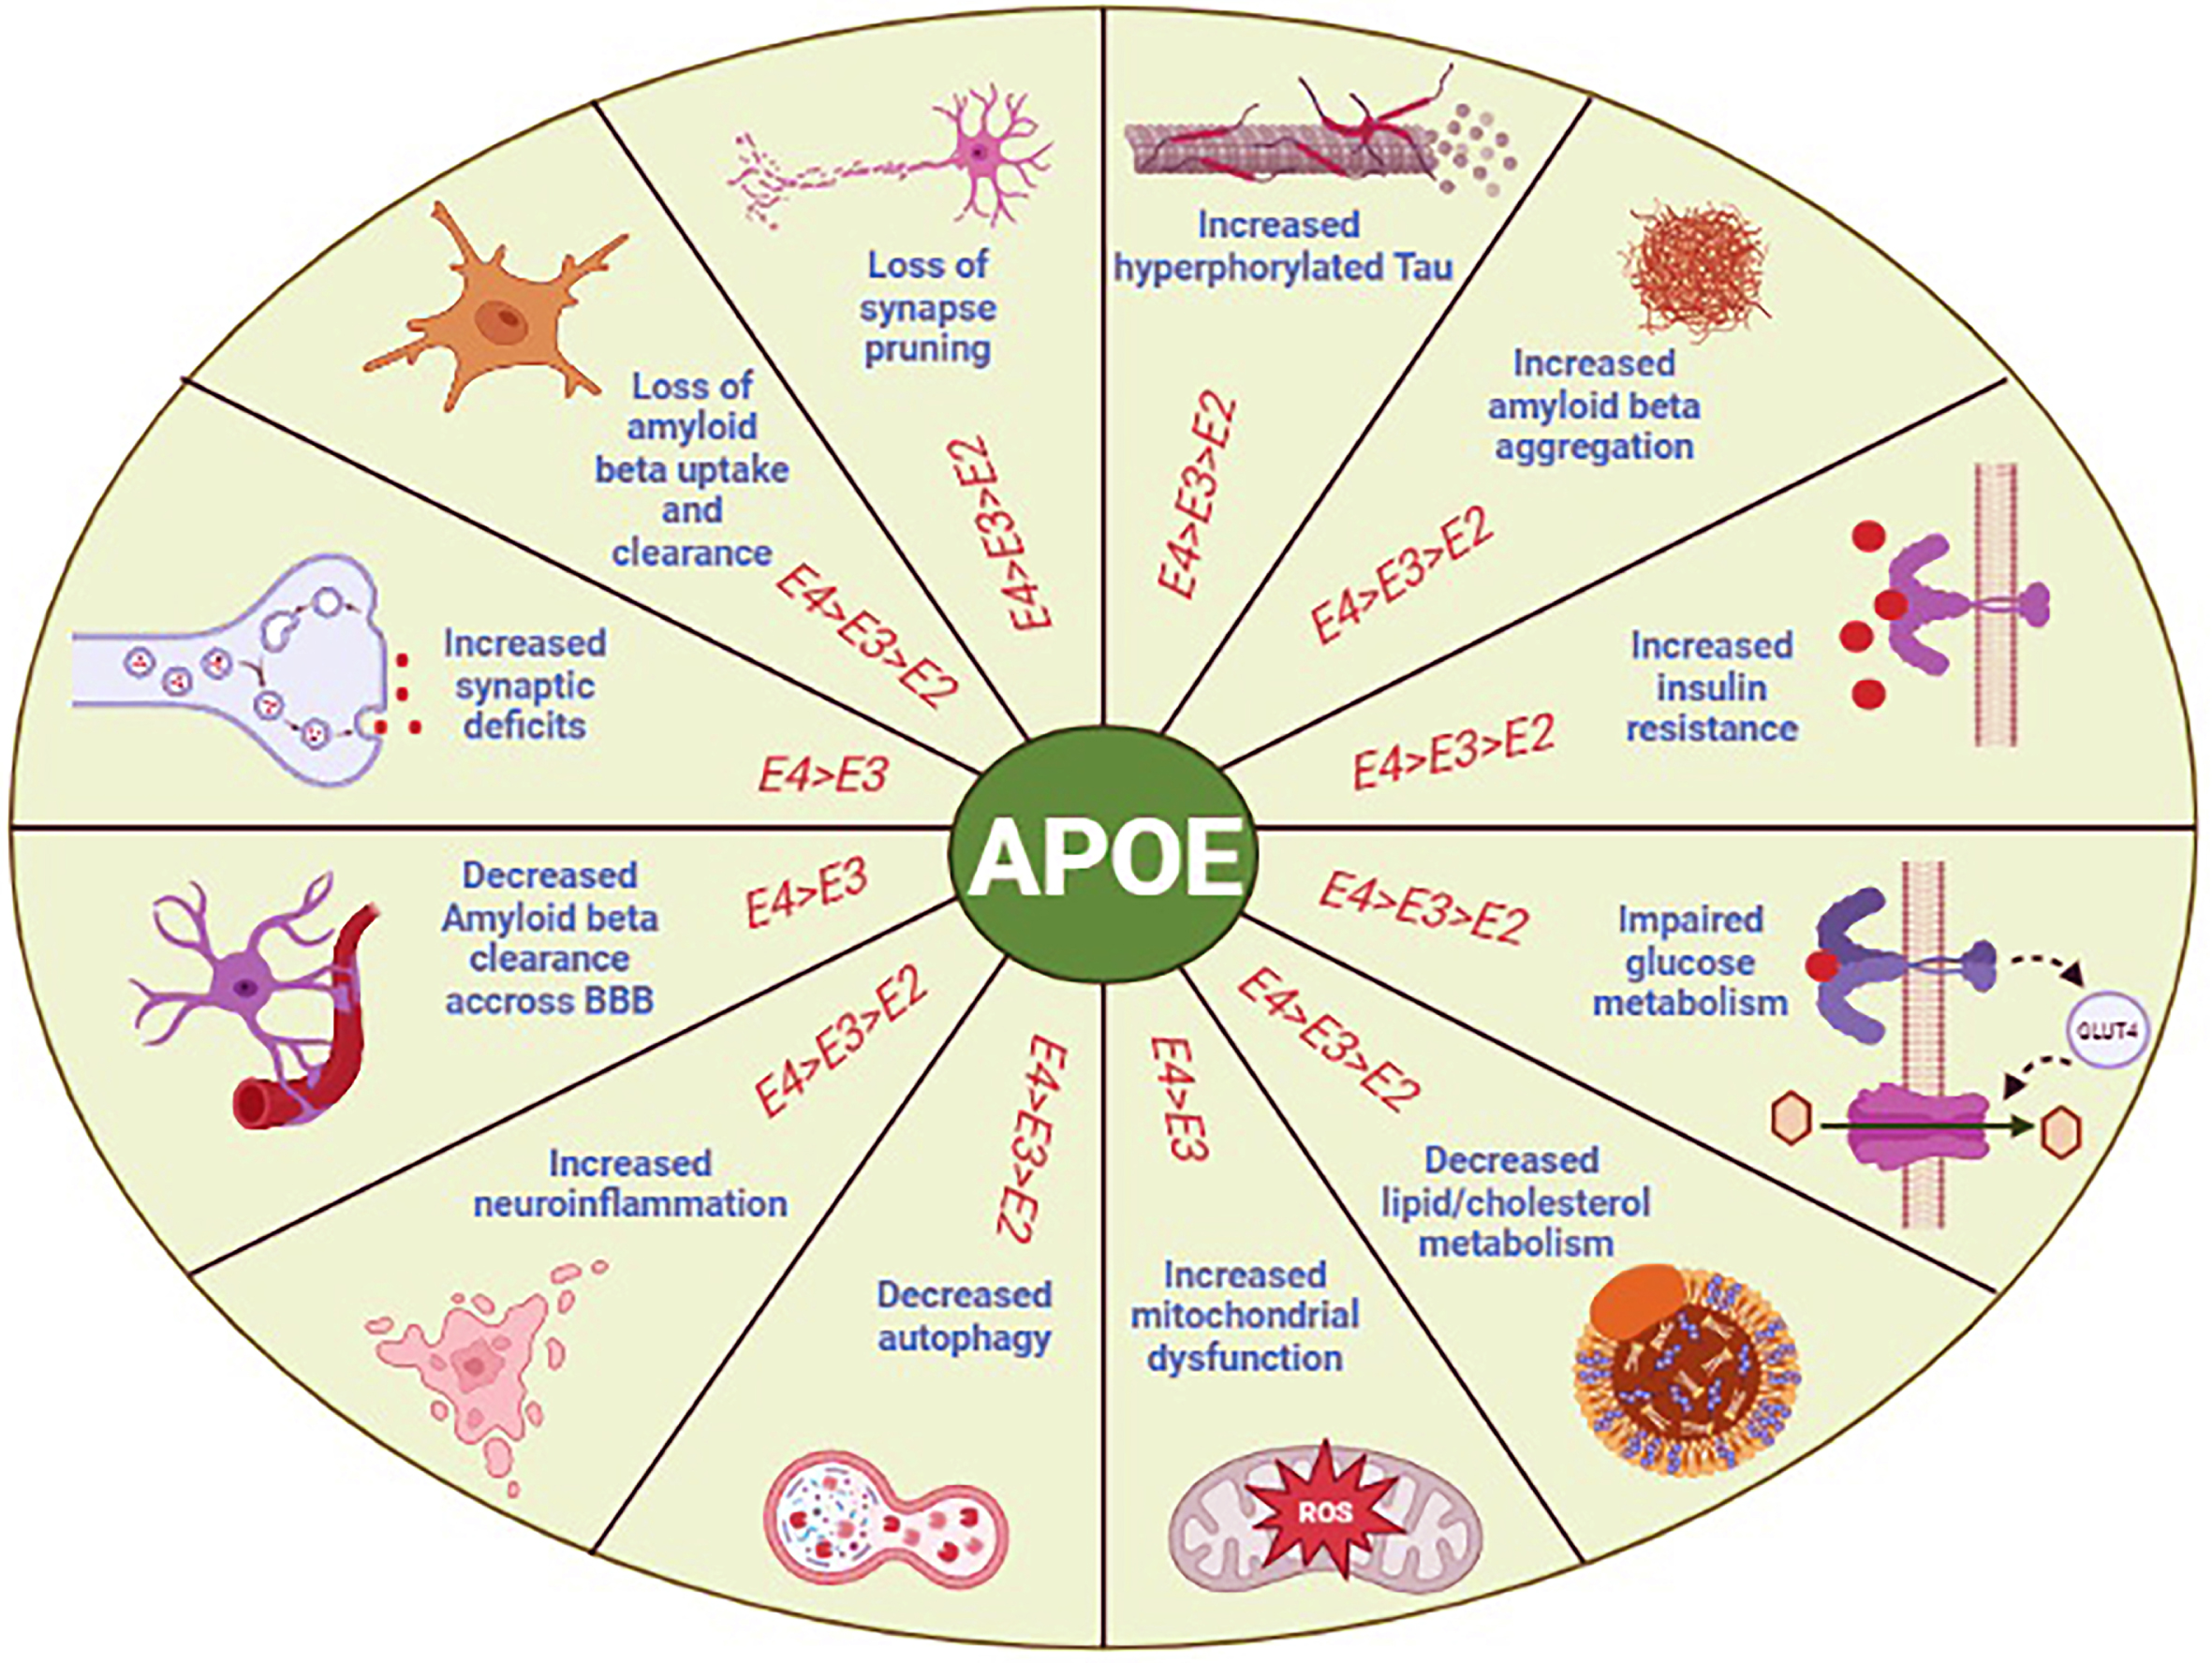 Schematic representation of APOE isoform-dependent effects on the common features of Alzheimer’s disease (AD) and stroke. Specifically, APOE4 carriers are more susceptible to produce more plaques and tangles, and to have advanced insulin resistance, mitochondrial dysfunction, neuroinflammation, and synaptic deficits. The APOE4 isoform is also responsible for decrease metabolism of glucose, lipid, cholesterol, autophagy, Aβ clearance across the blood-brain barrier (BBB), and a gradual loss of Aβ uptake and clearance by microglia causing neurodegenerative diseases such as AD and ischemic stroke.